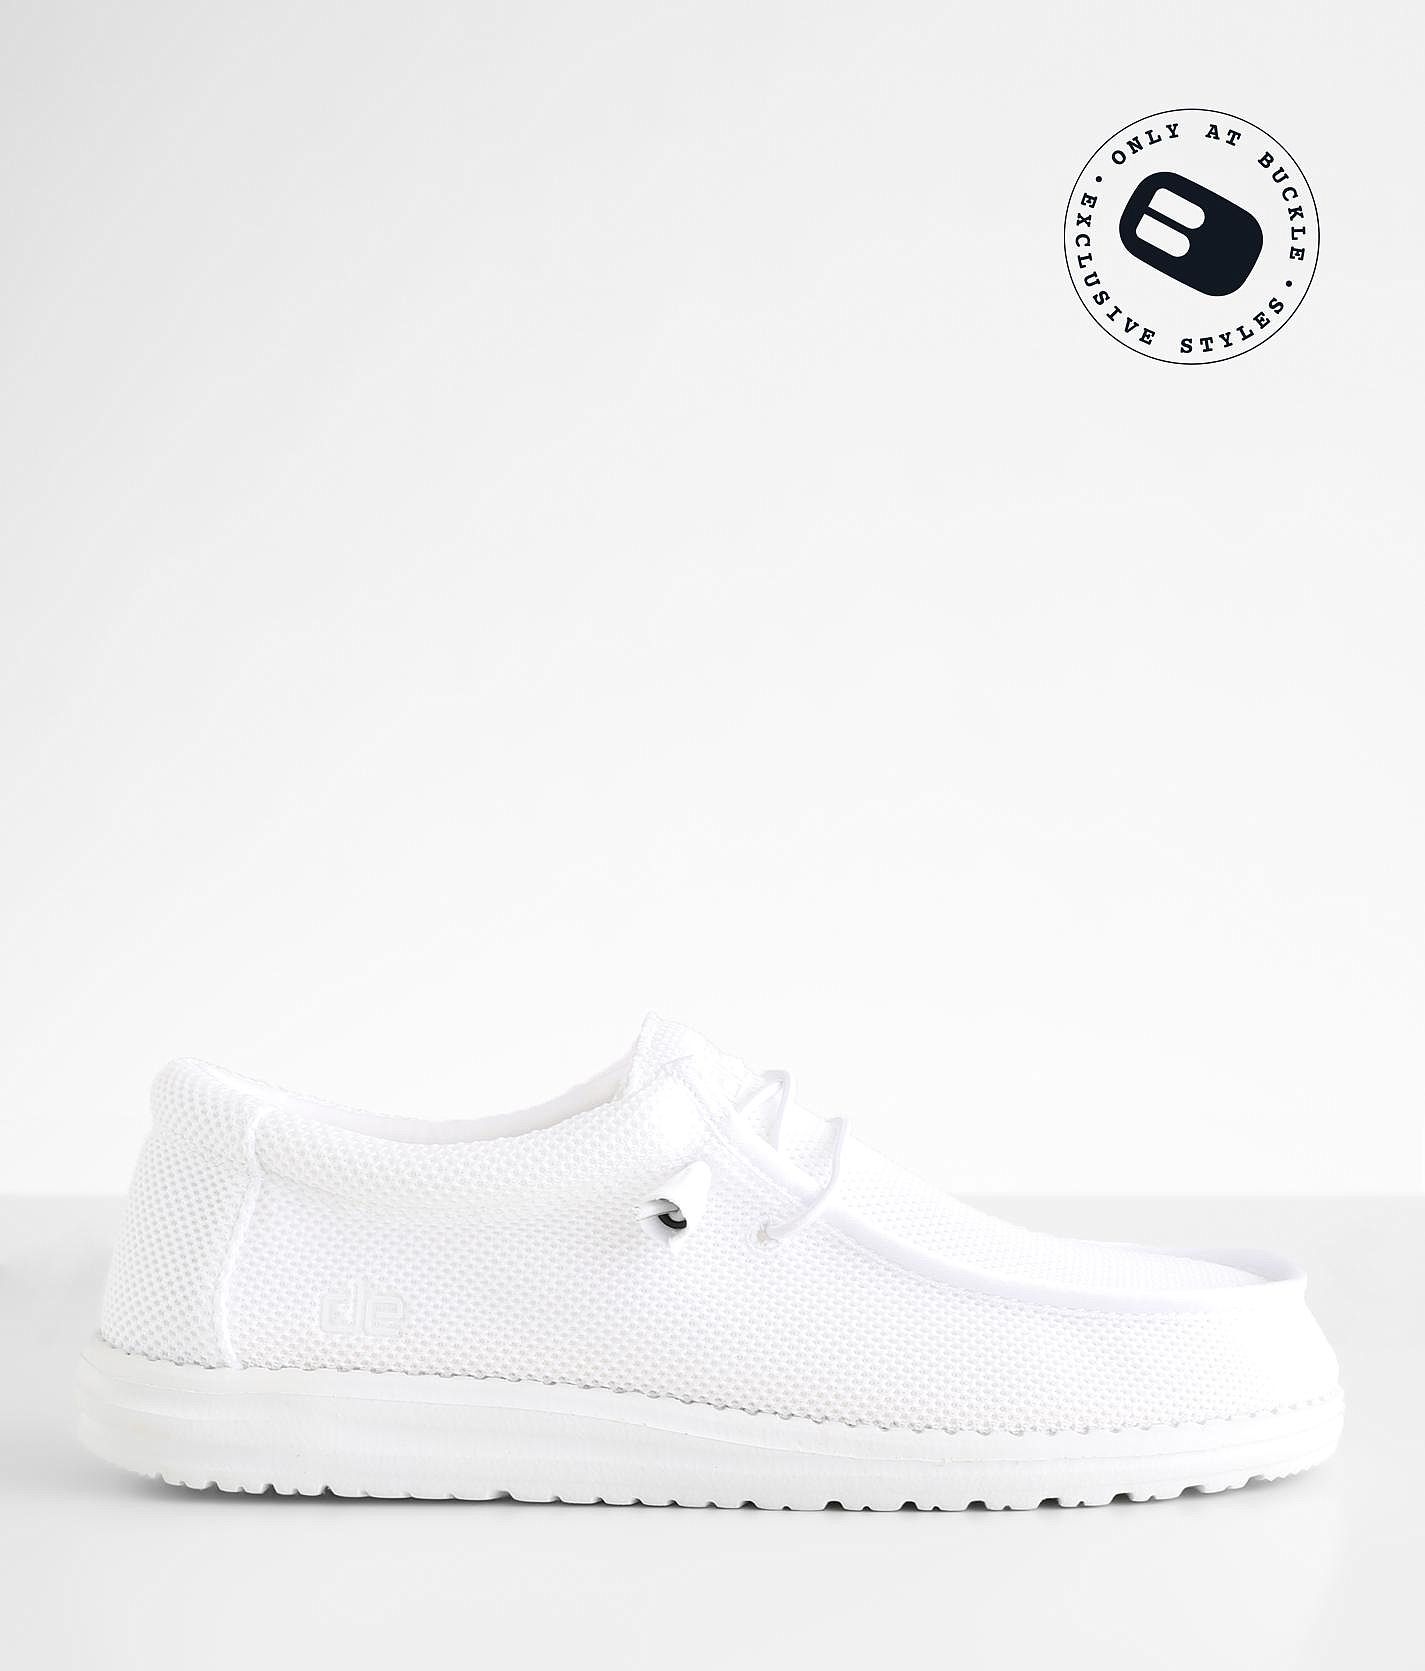 HEYDUDE™ Wally Sox Shoe - Men's Shoes in White